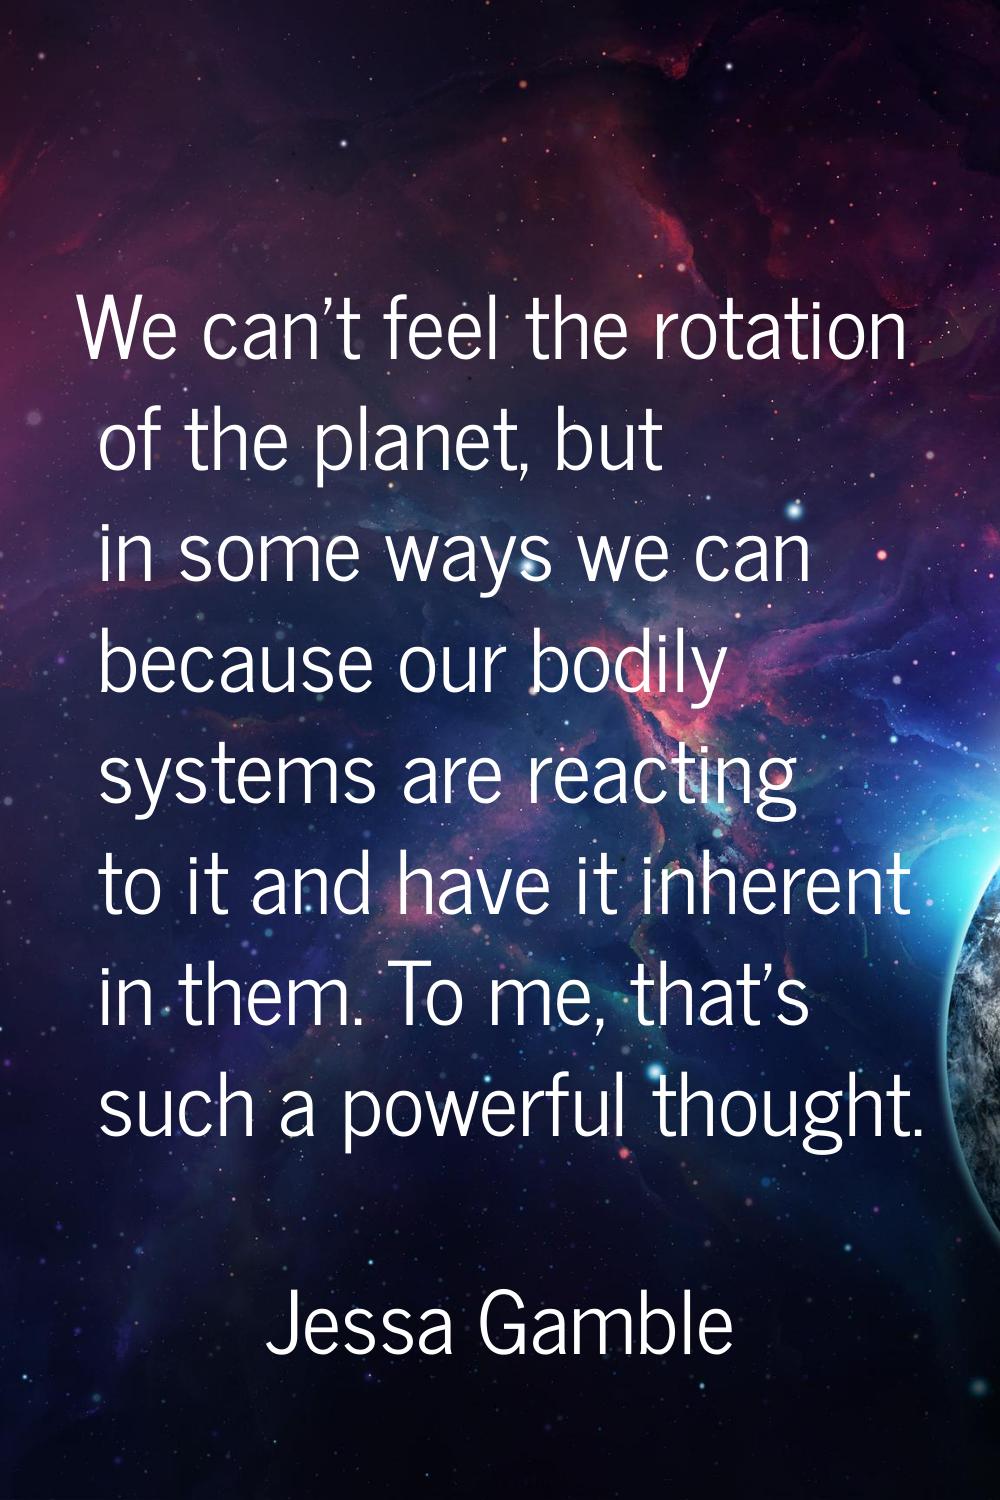 We can't feel the rotation of the planet, but in some ways we can because our bodily systems are re